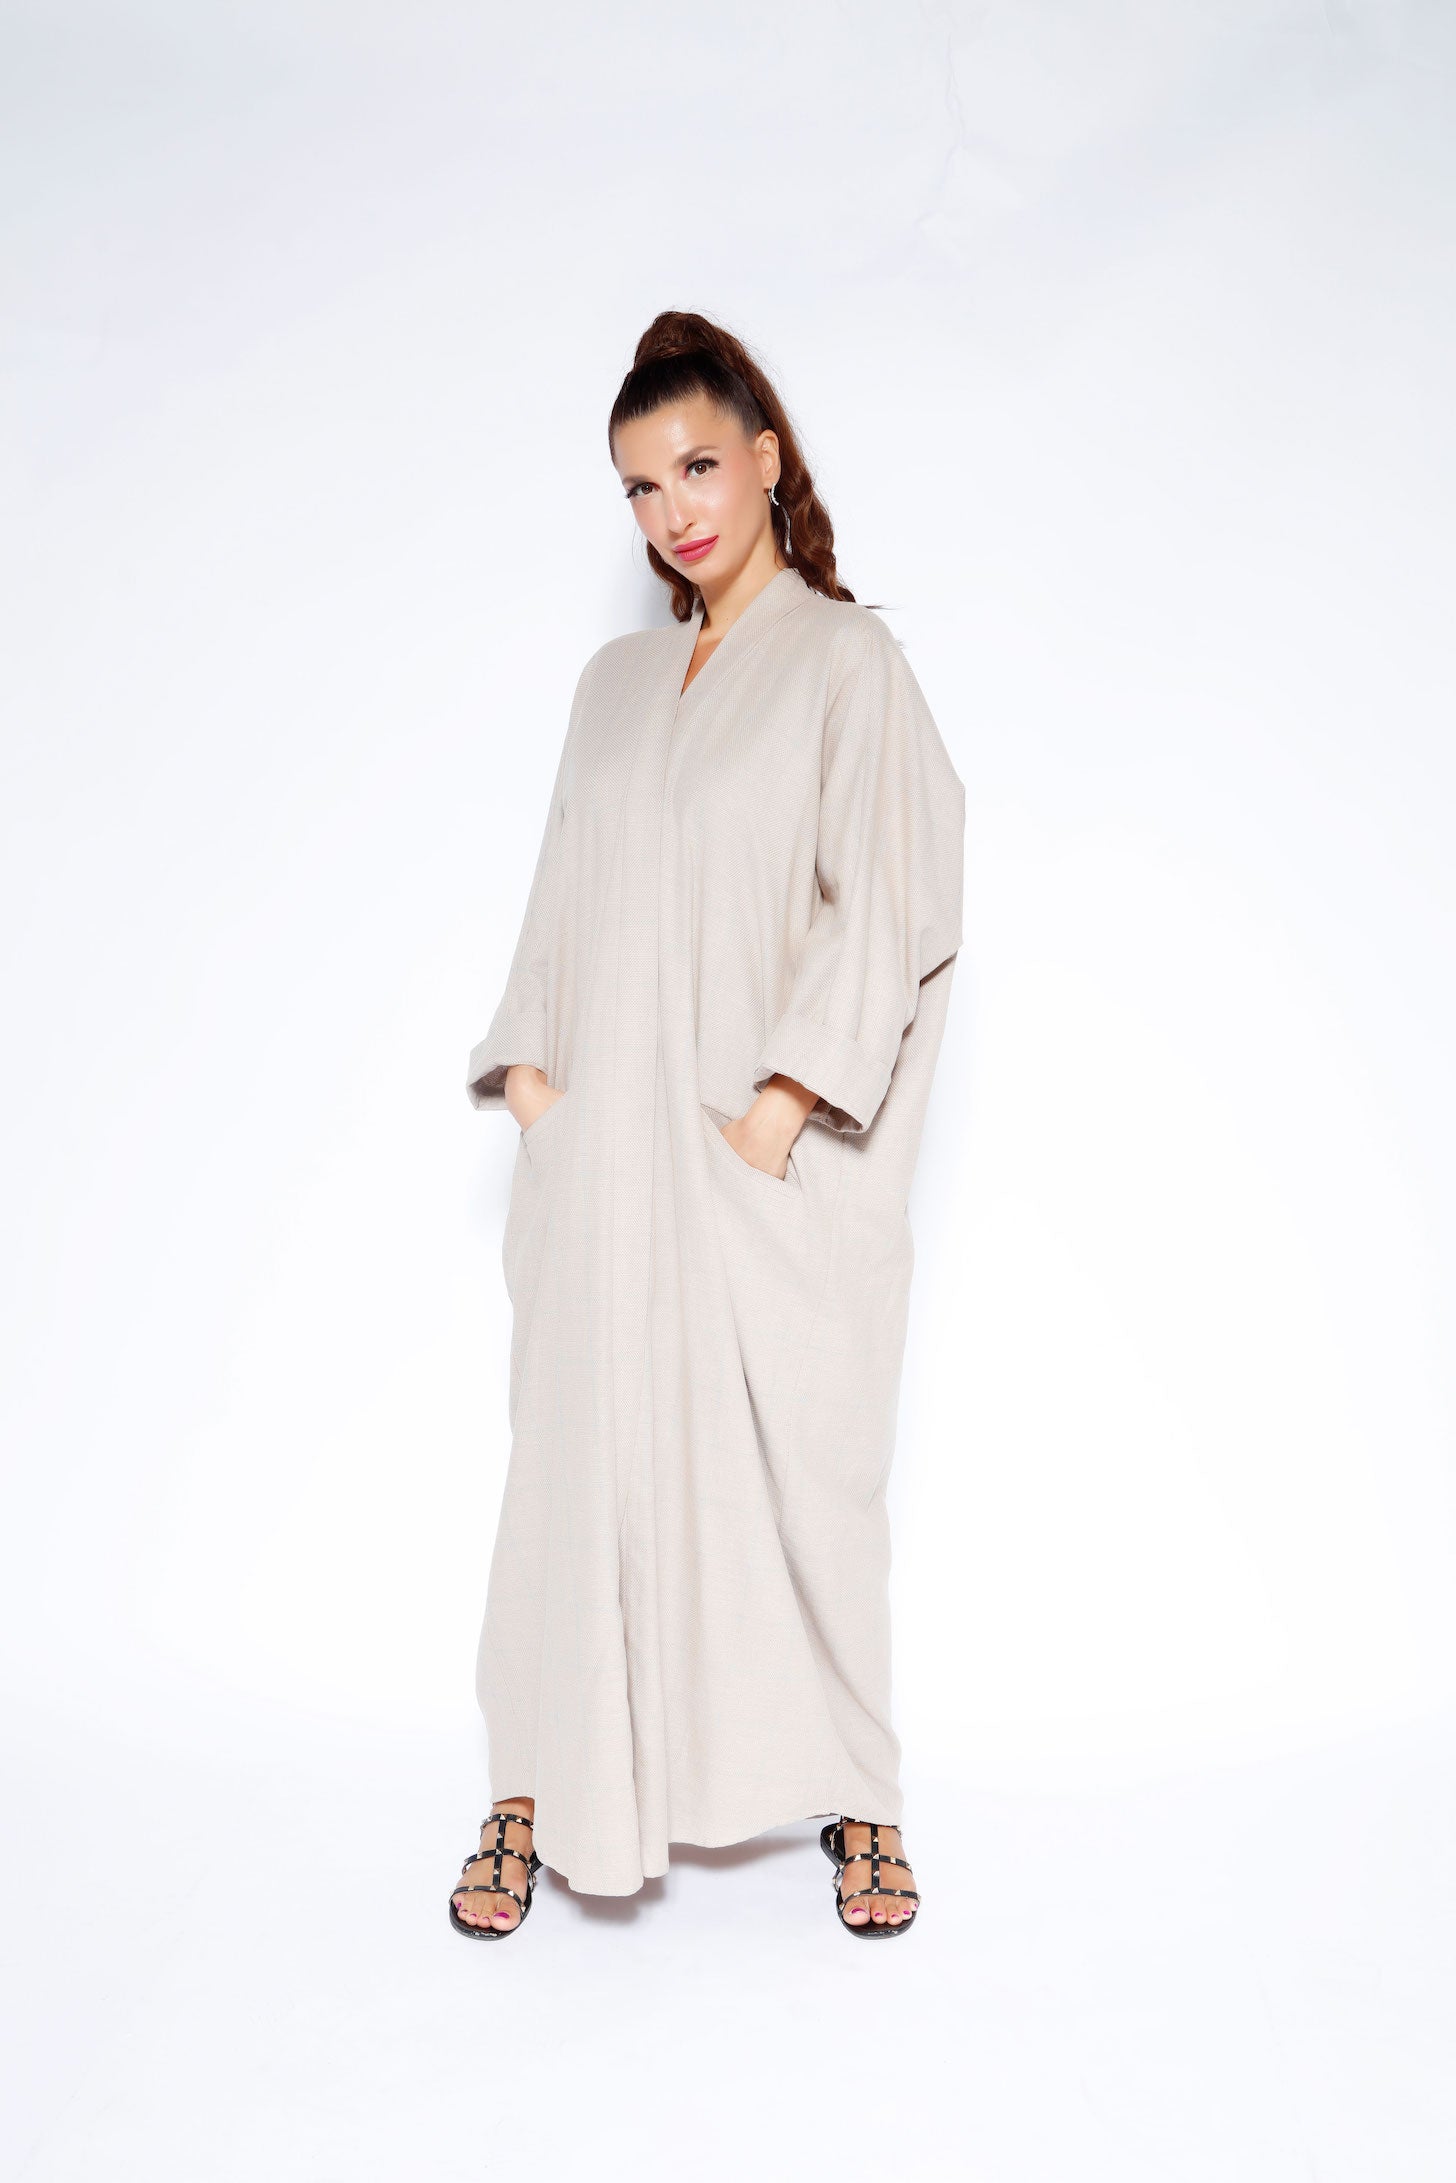 Beige linen abaya featuring an open-front style with front slit pockets